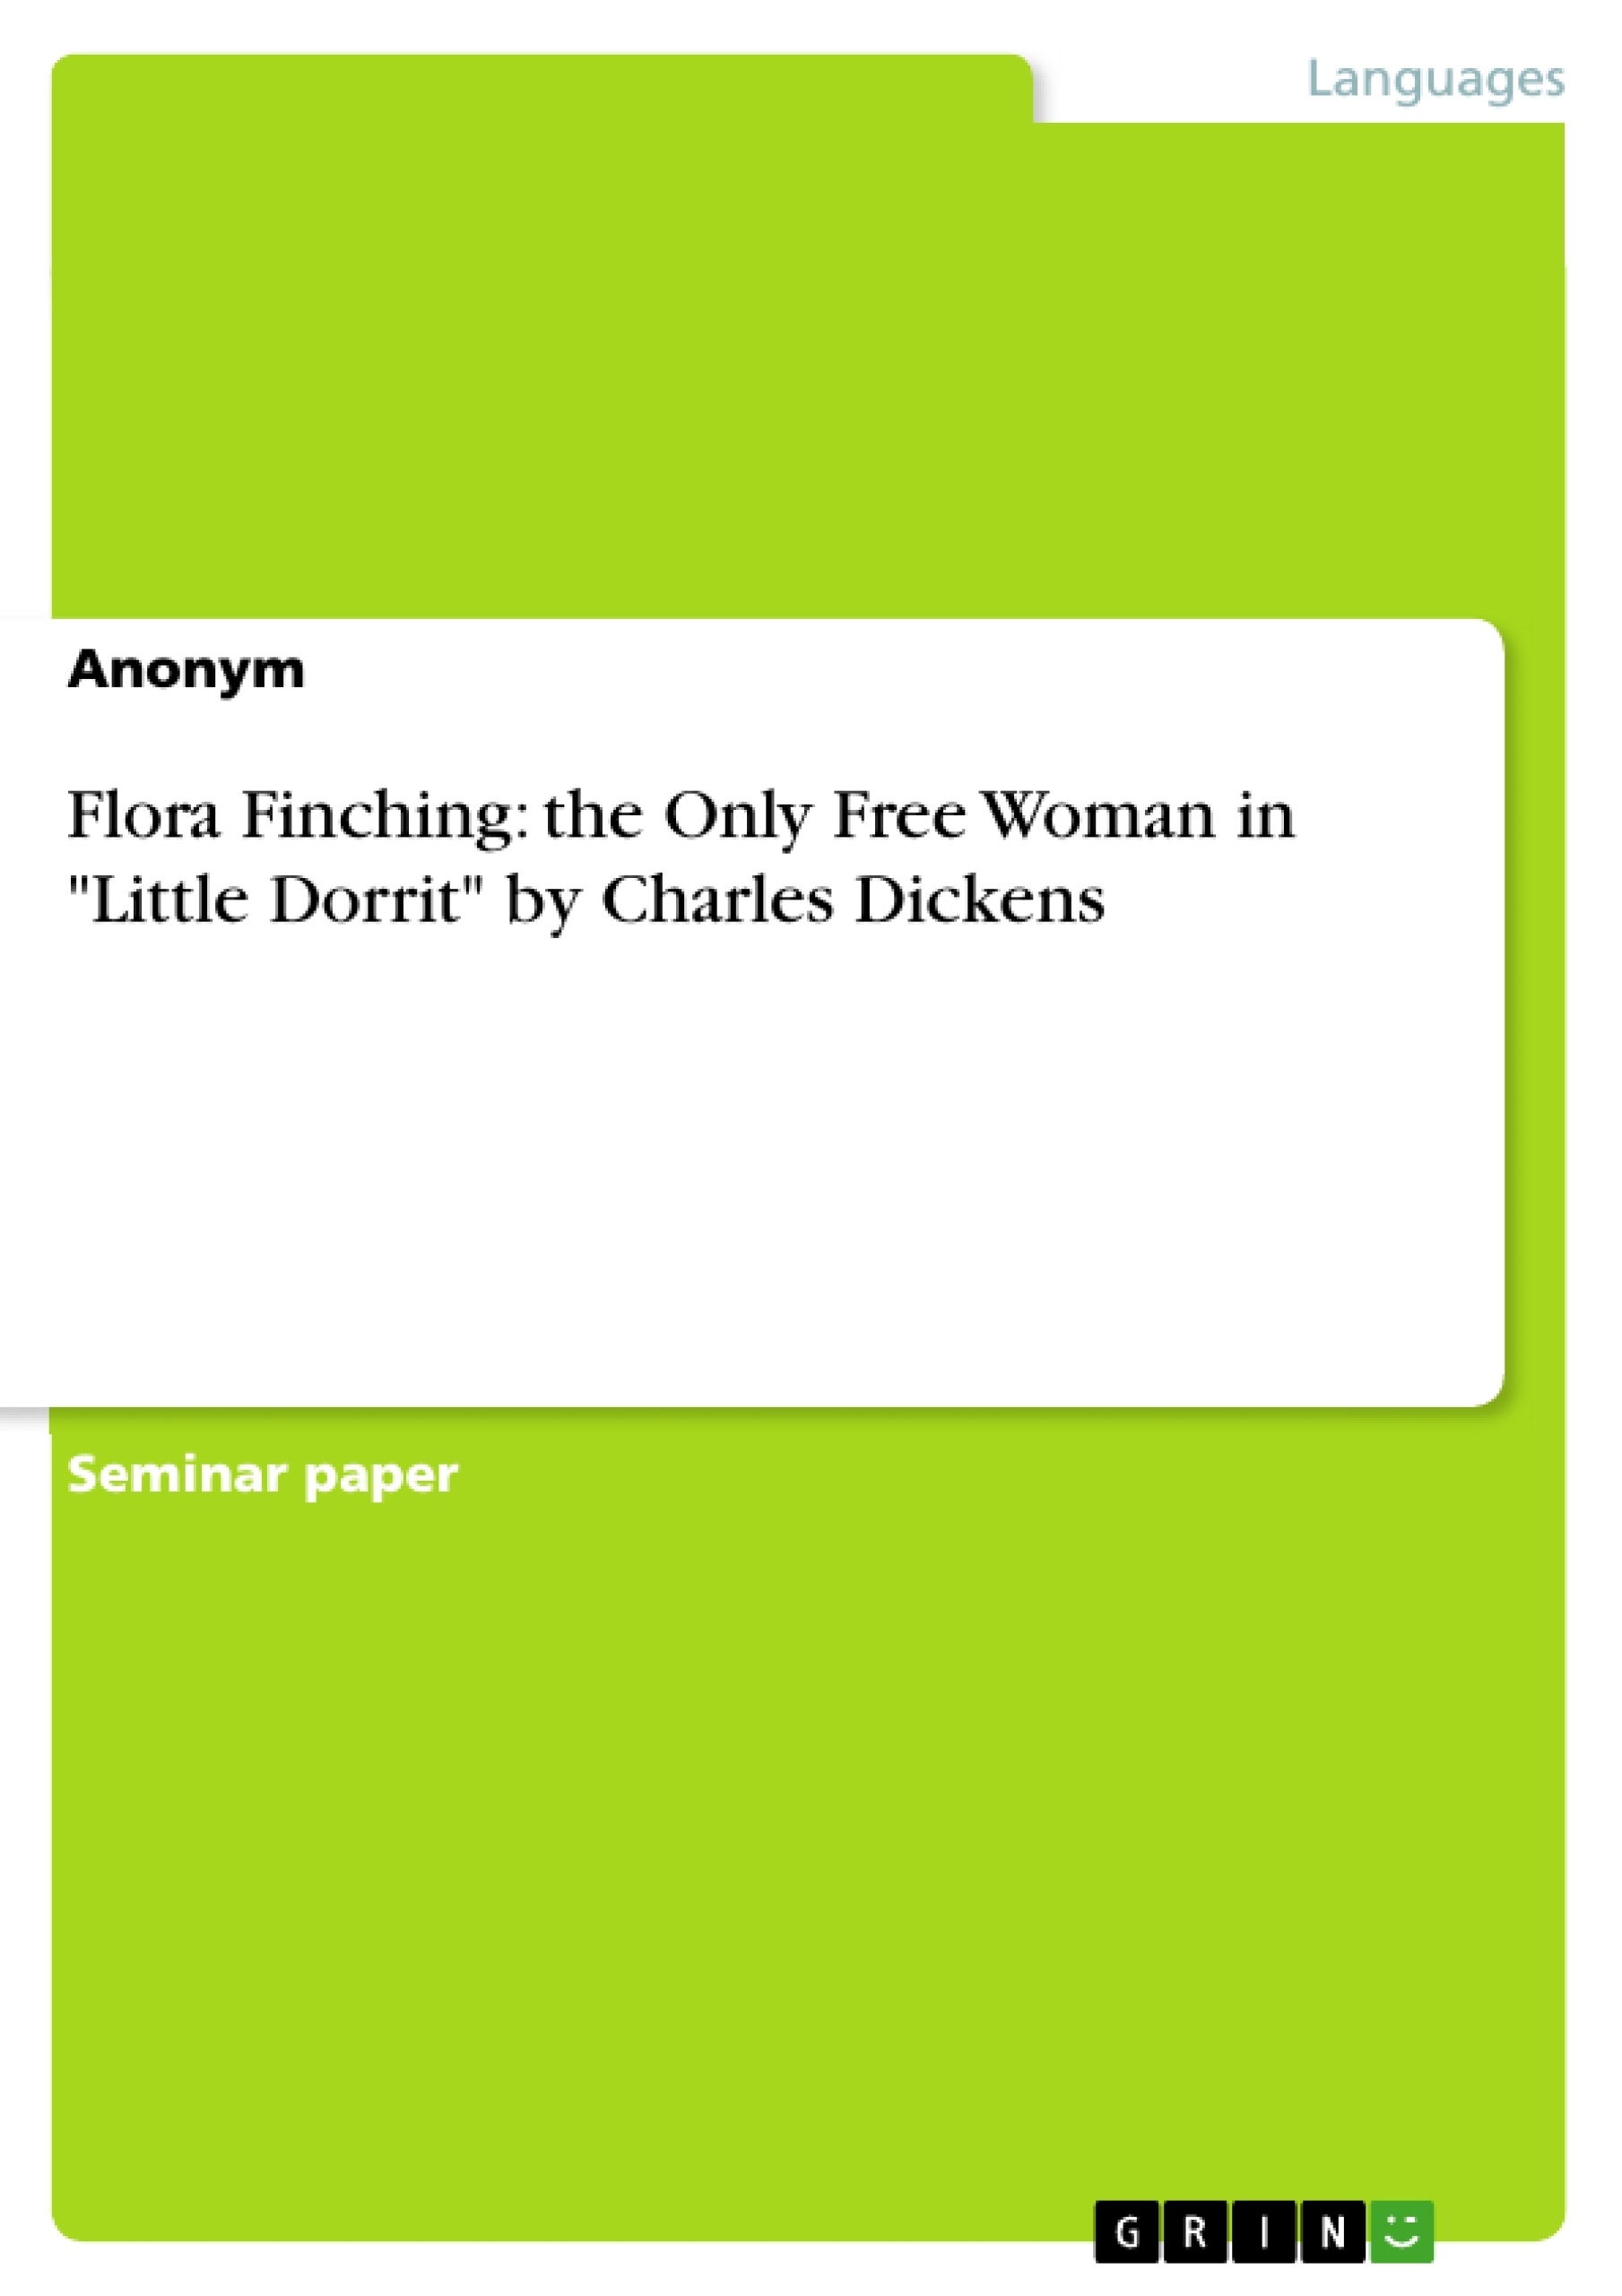 Título: Flora Finching: the Only Free Woman in "Little Dorrit" by Charles Dickens